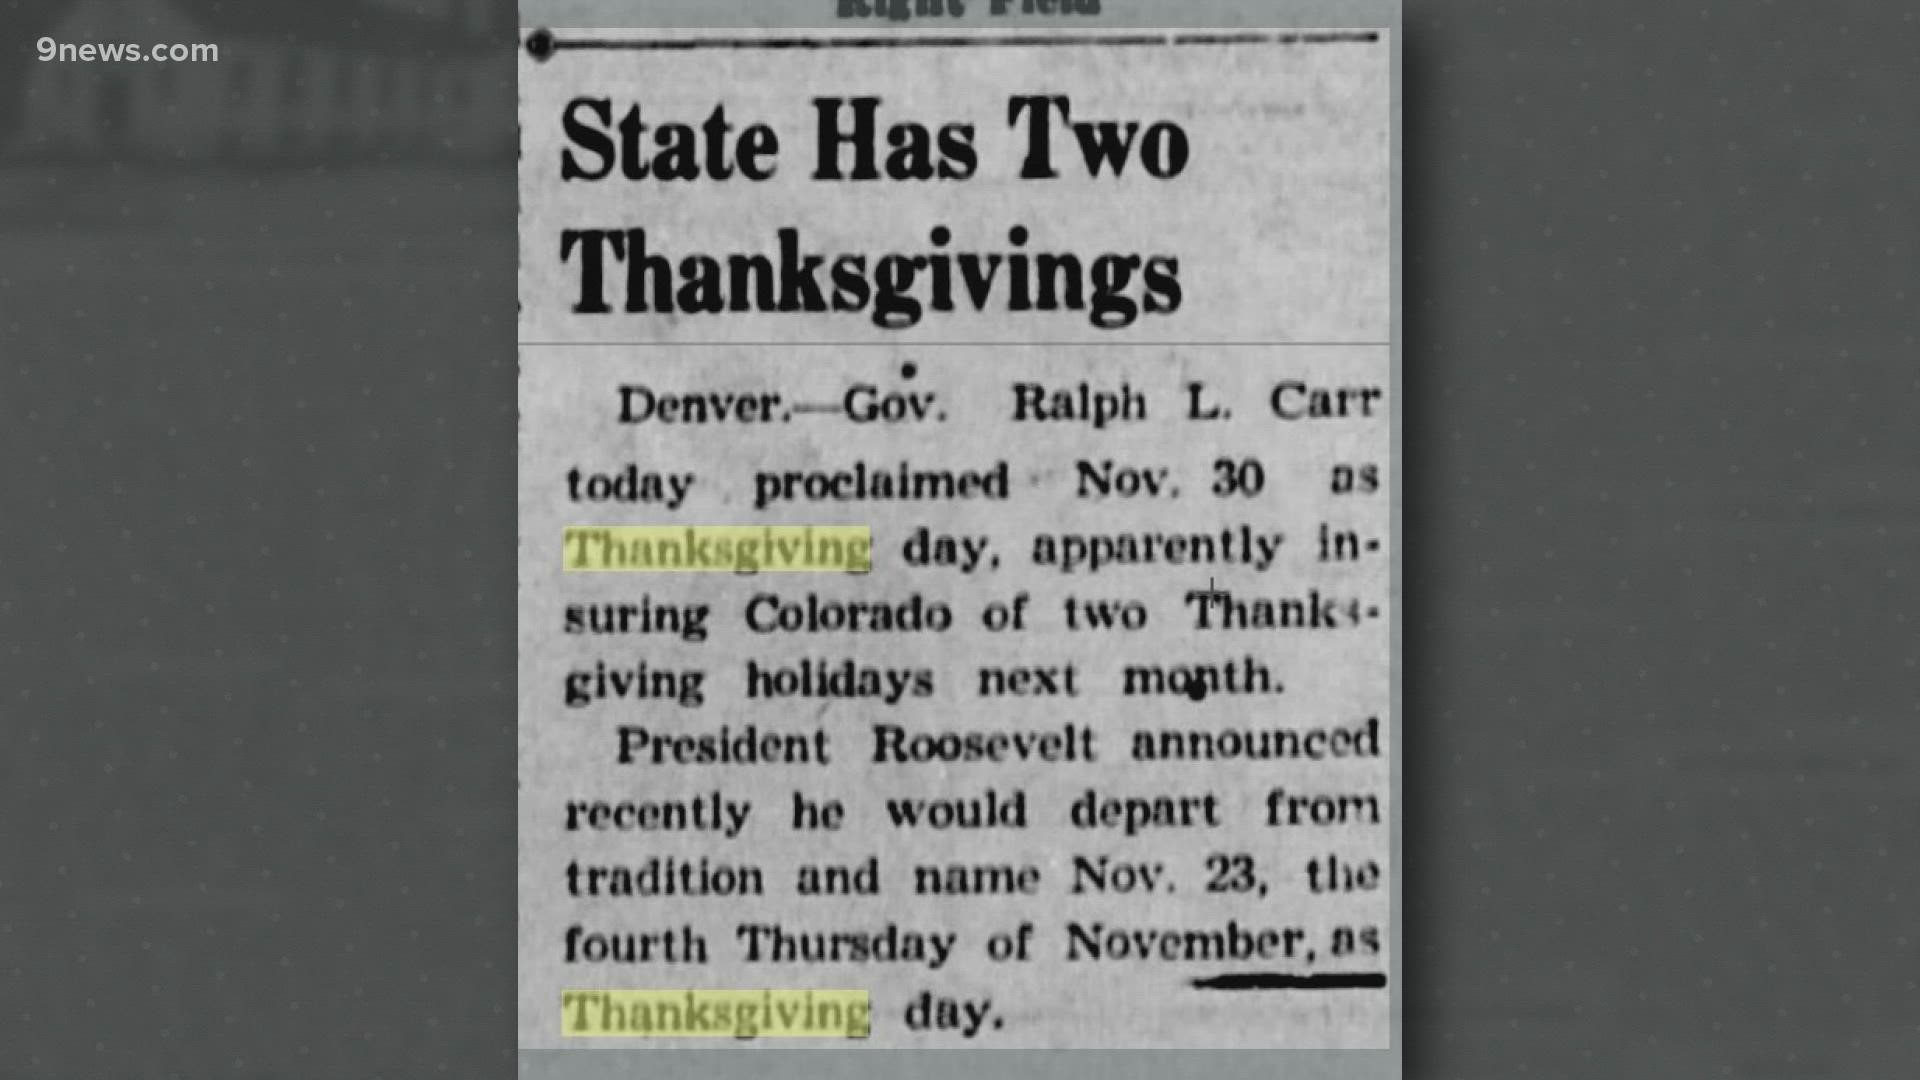 We remember the strange year when Colorado couldn't decide when to celebrate Thanksgiving, so we counted our blessings twice.